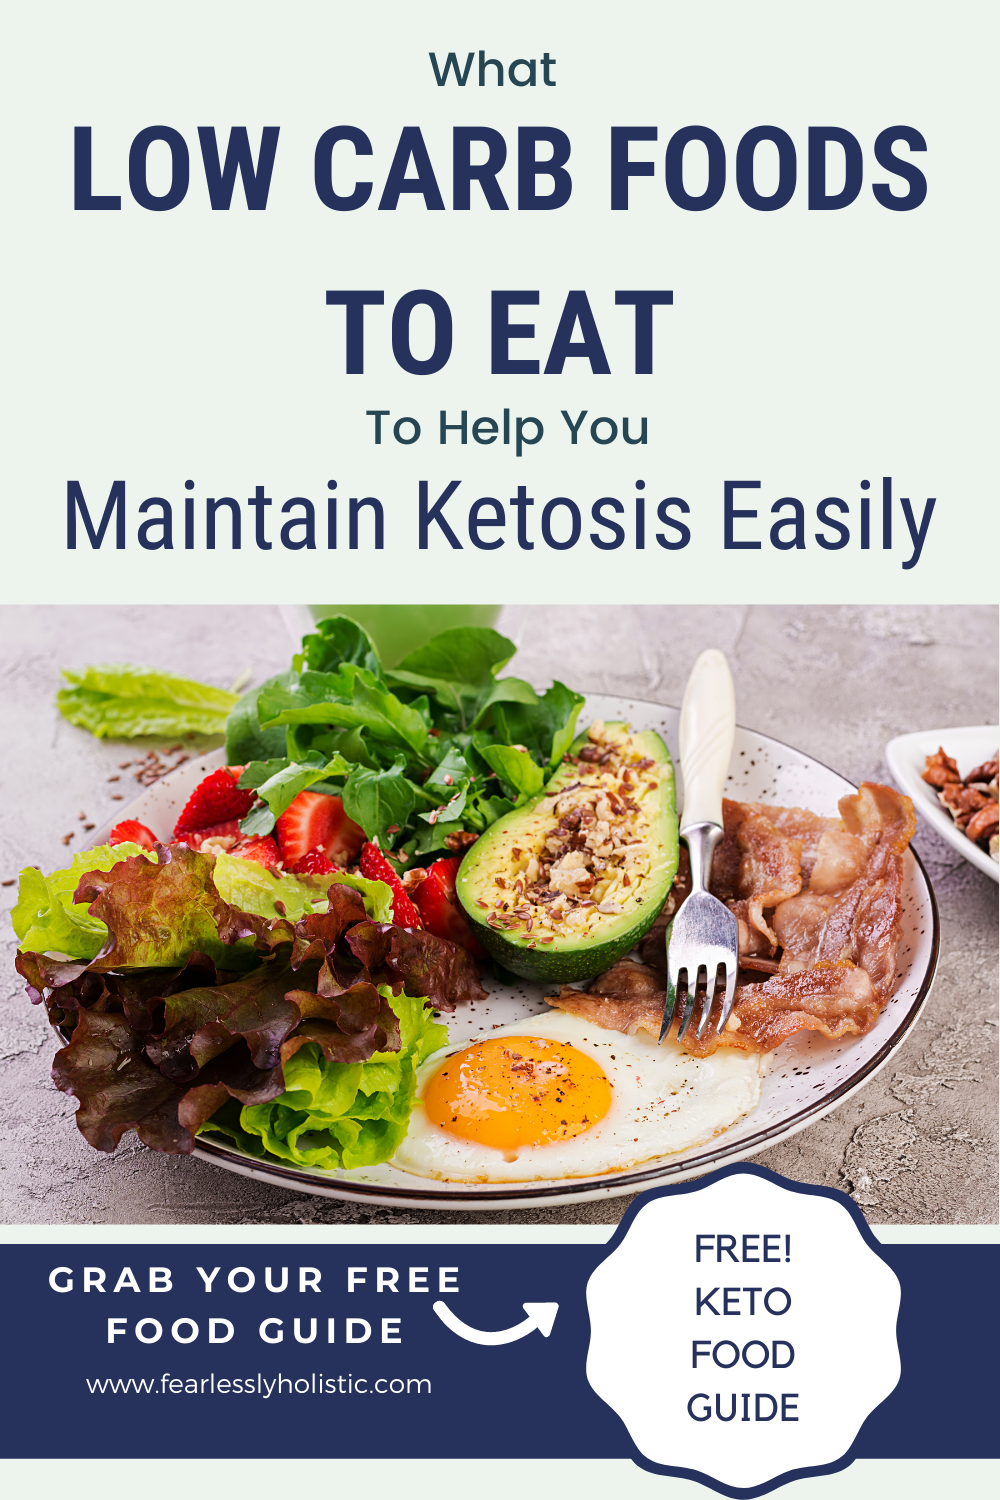 What Low Carb Foods To Eat To Maintain Ketosis